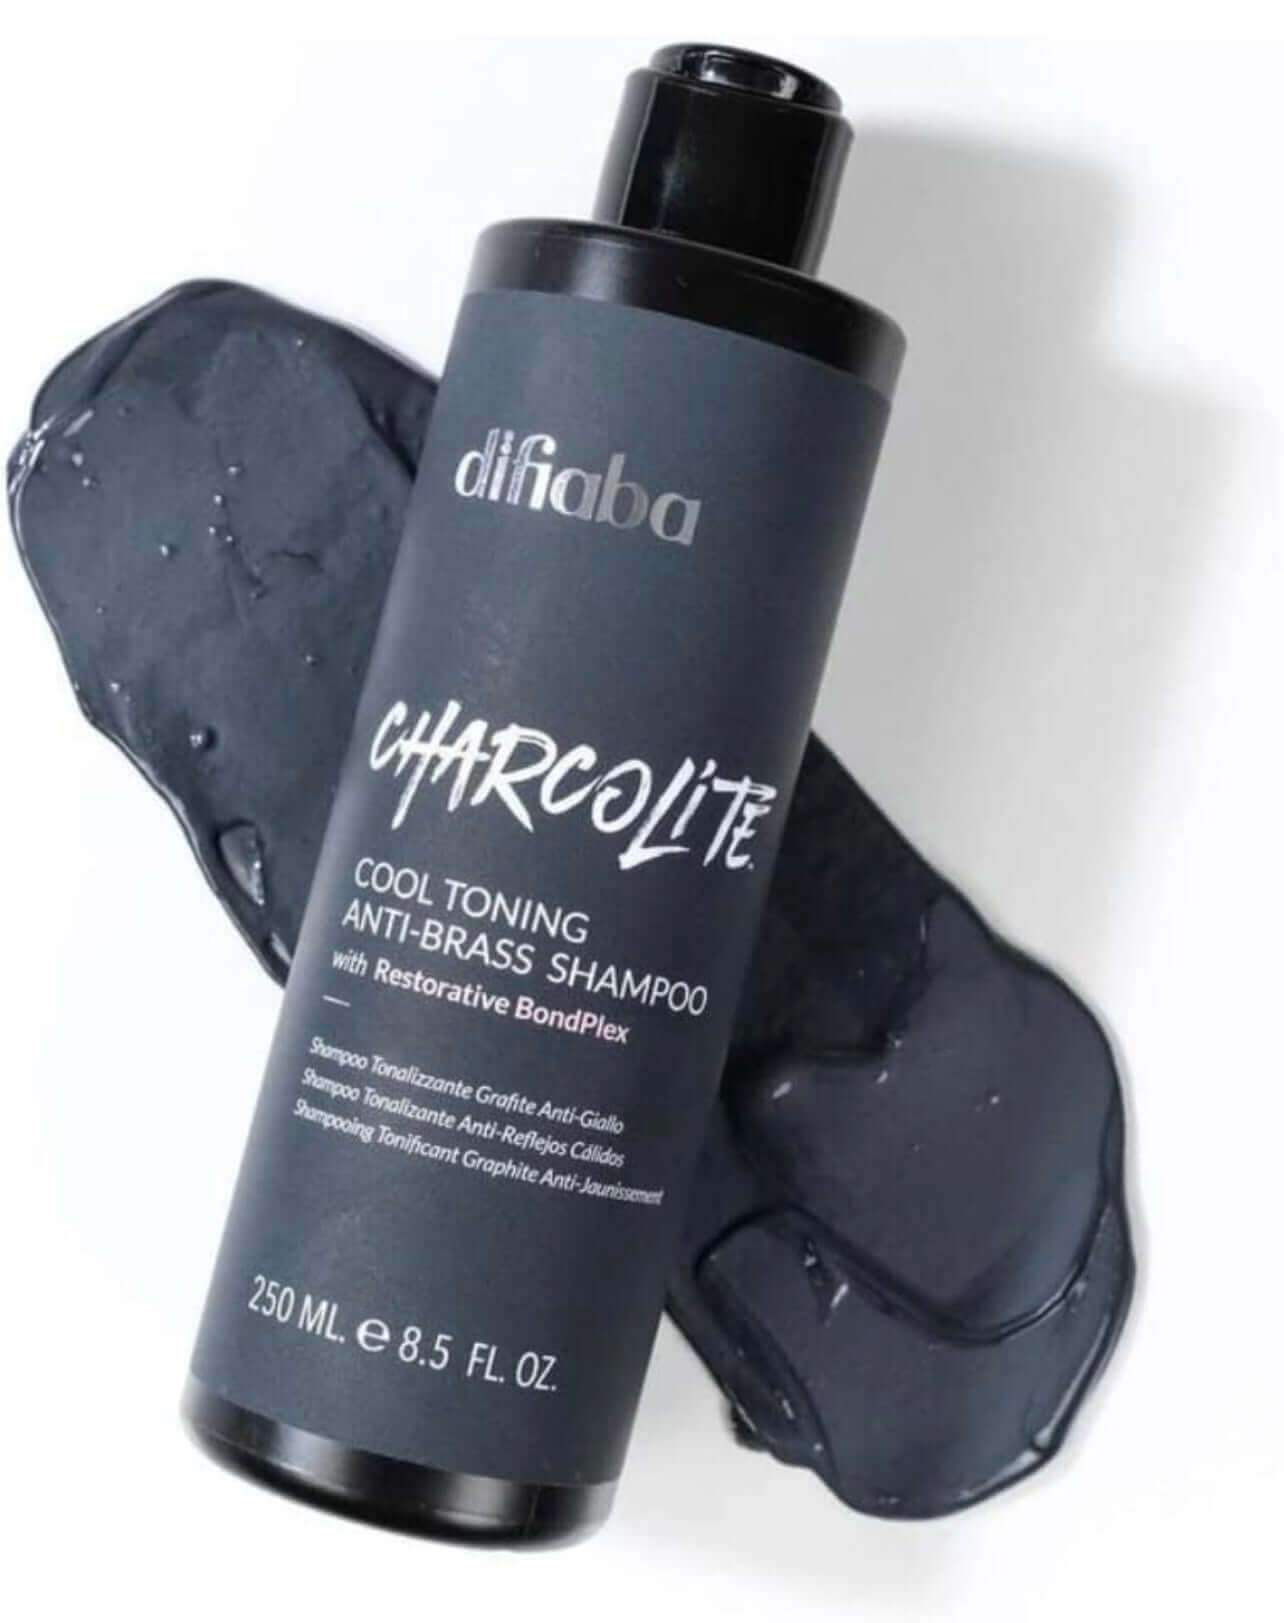 DIFIABA Charcolite Cool Toning Anti-Brass Shampoo a Shampoo from Simply Colour Hair Salon Studio & Online Store